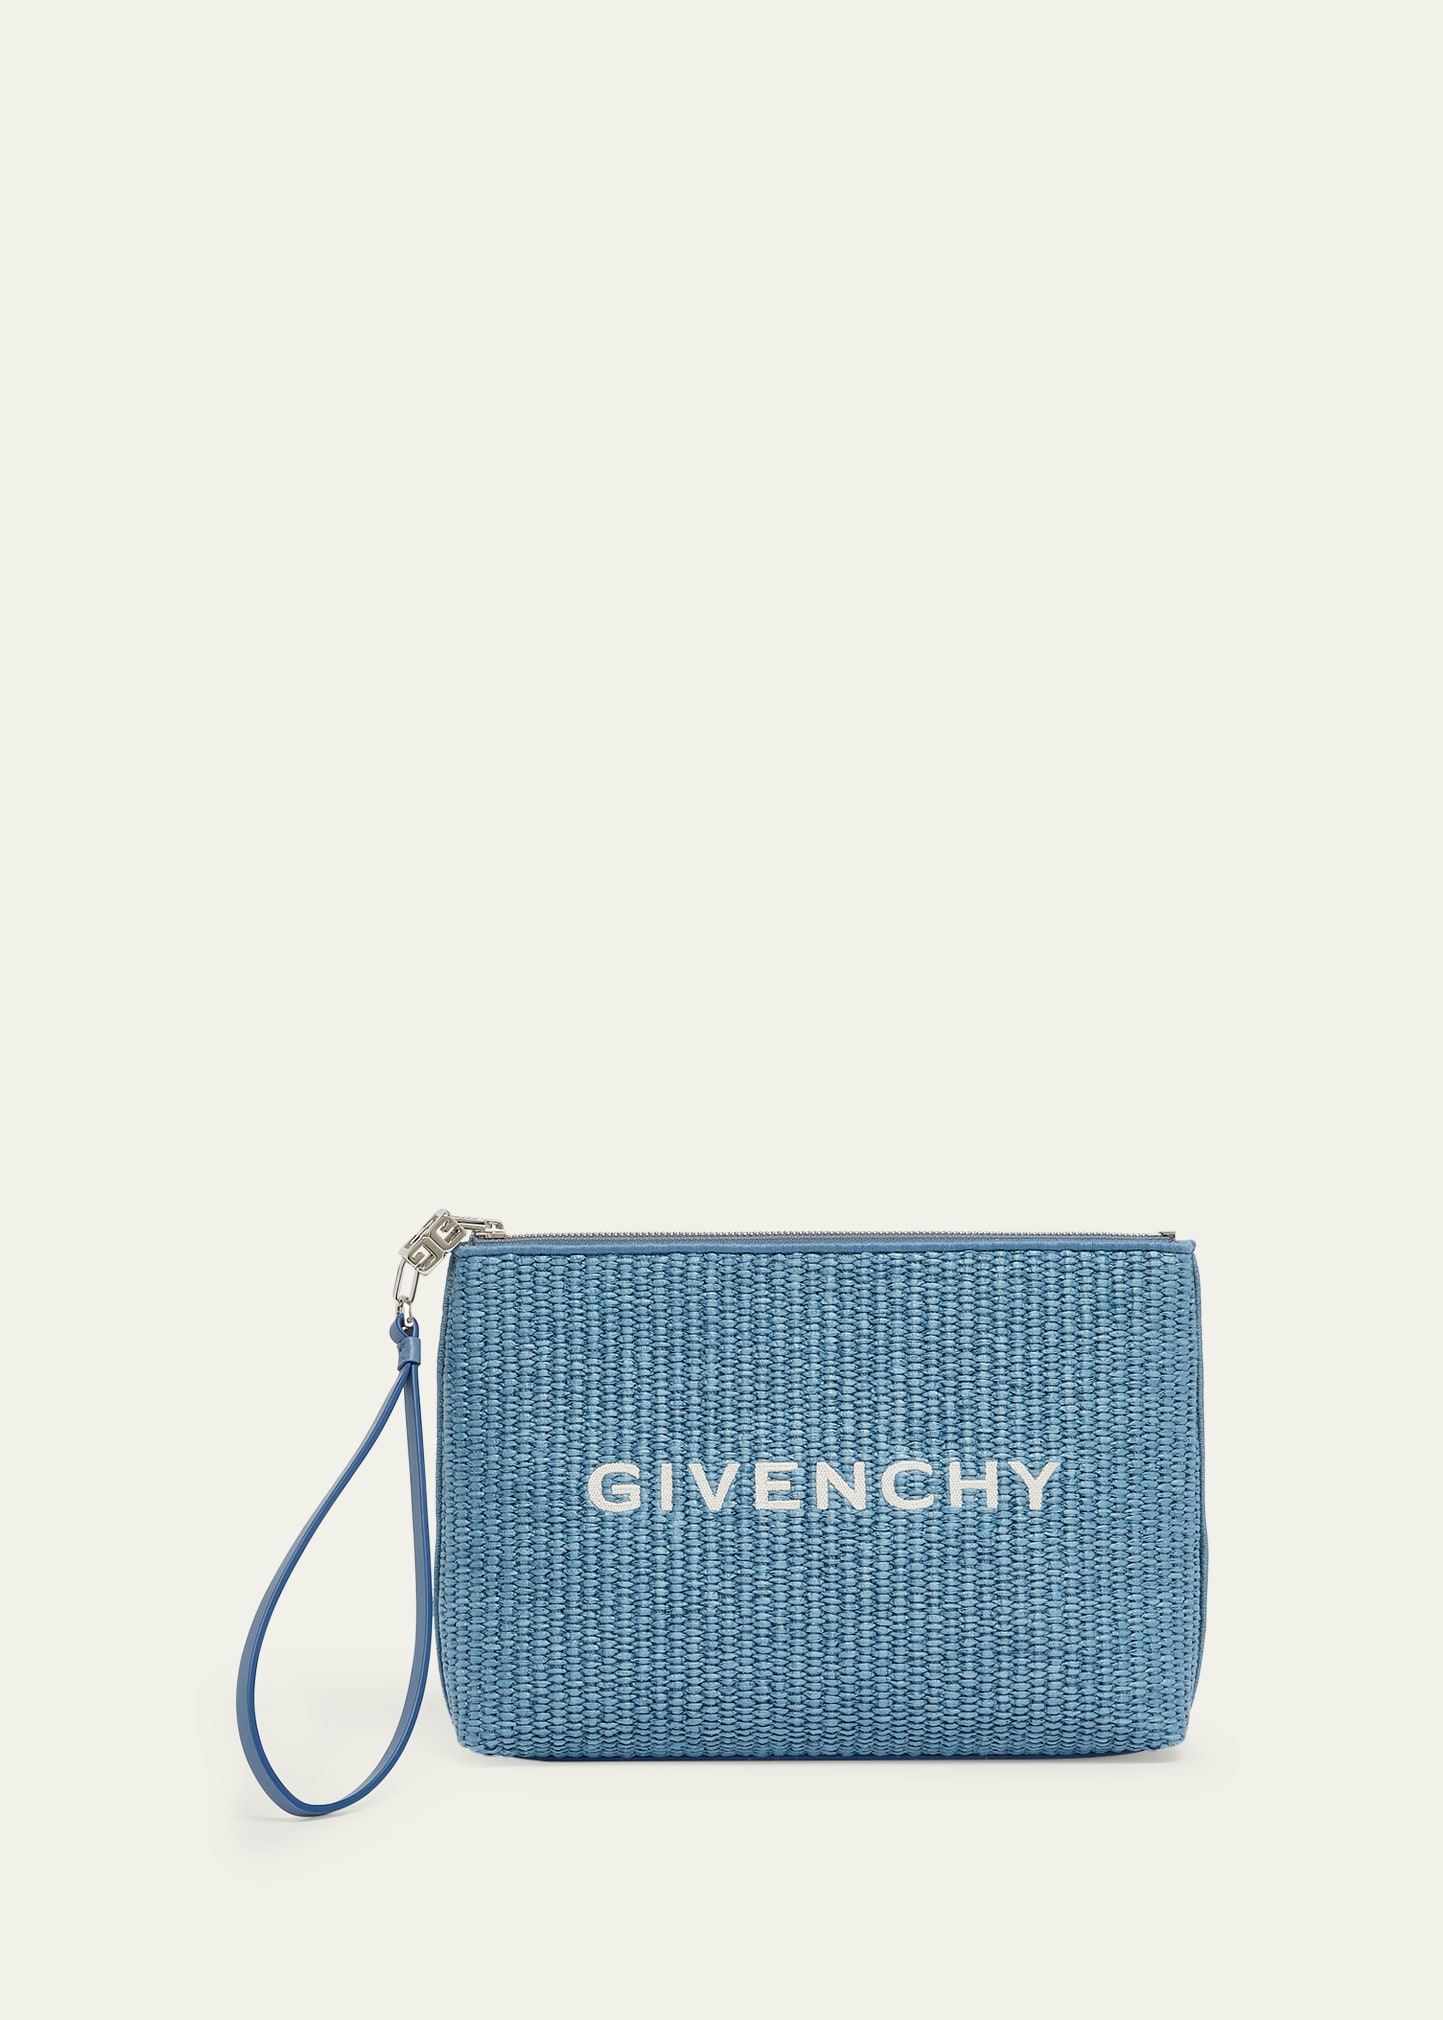 Givenchy Logo Travel Pouch Wristlet In Blue